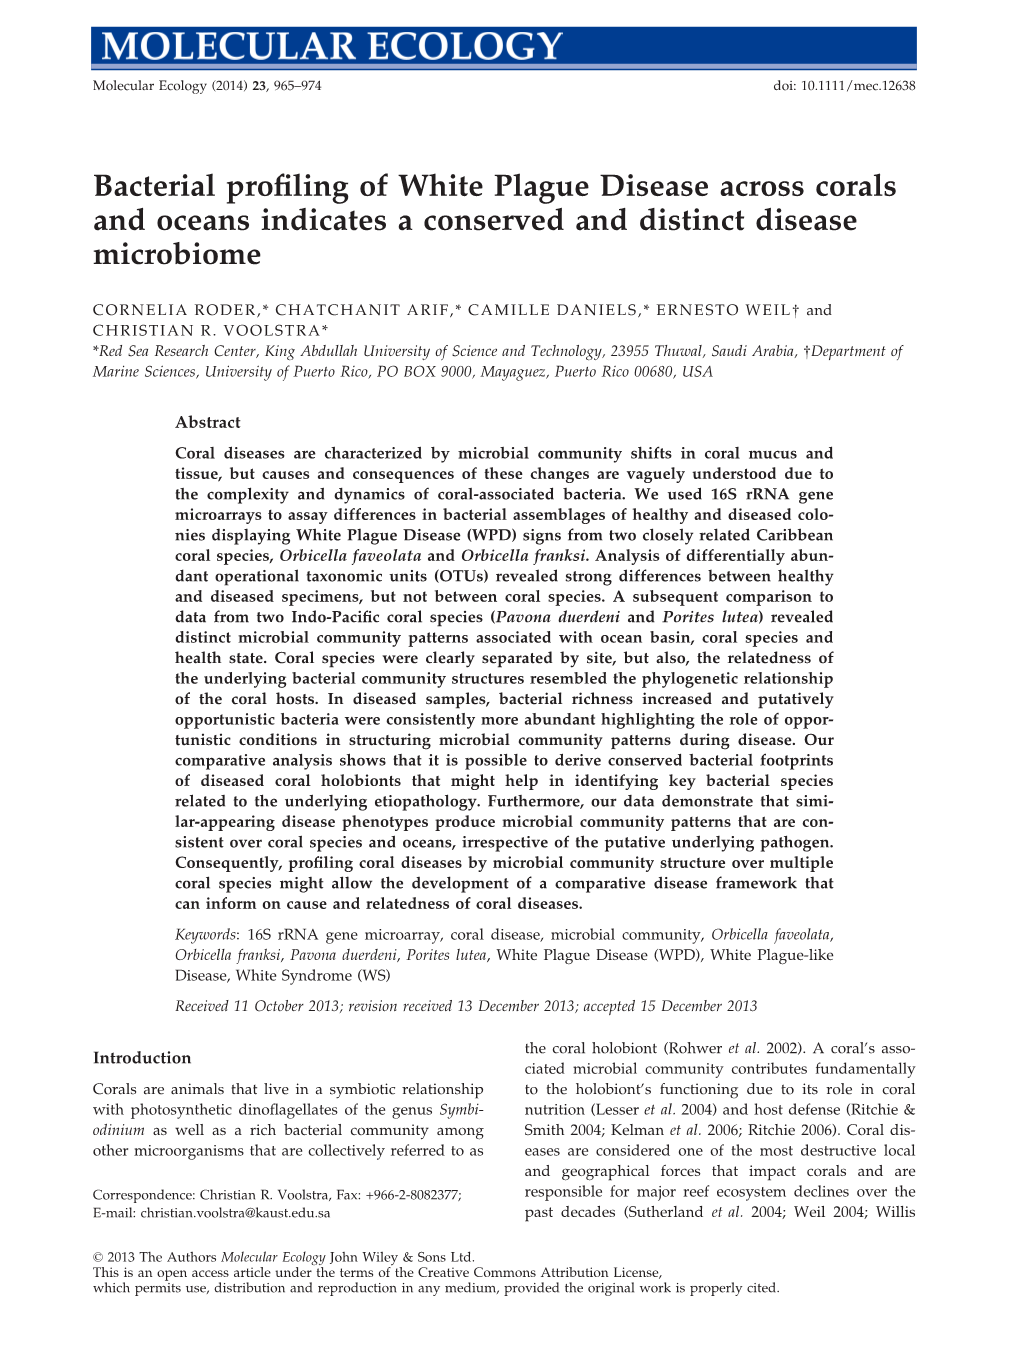 Bacterial Profiling of White Plague Disease Across Corals and Oceans